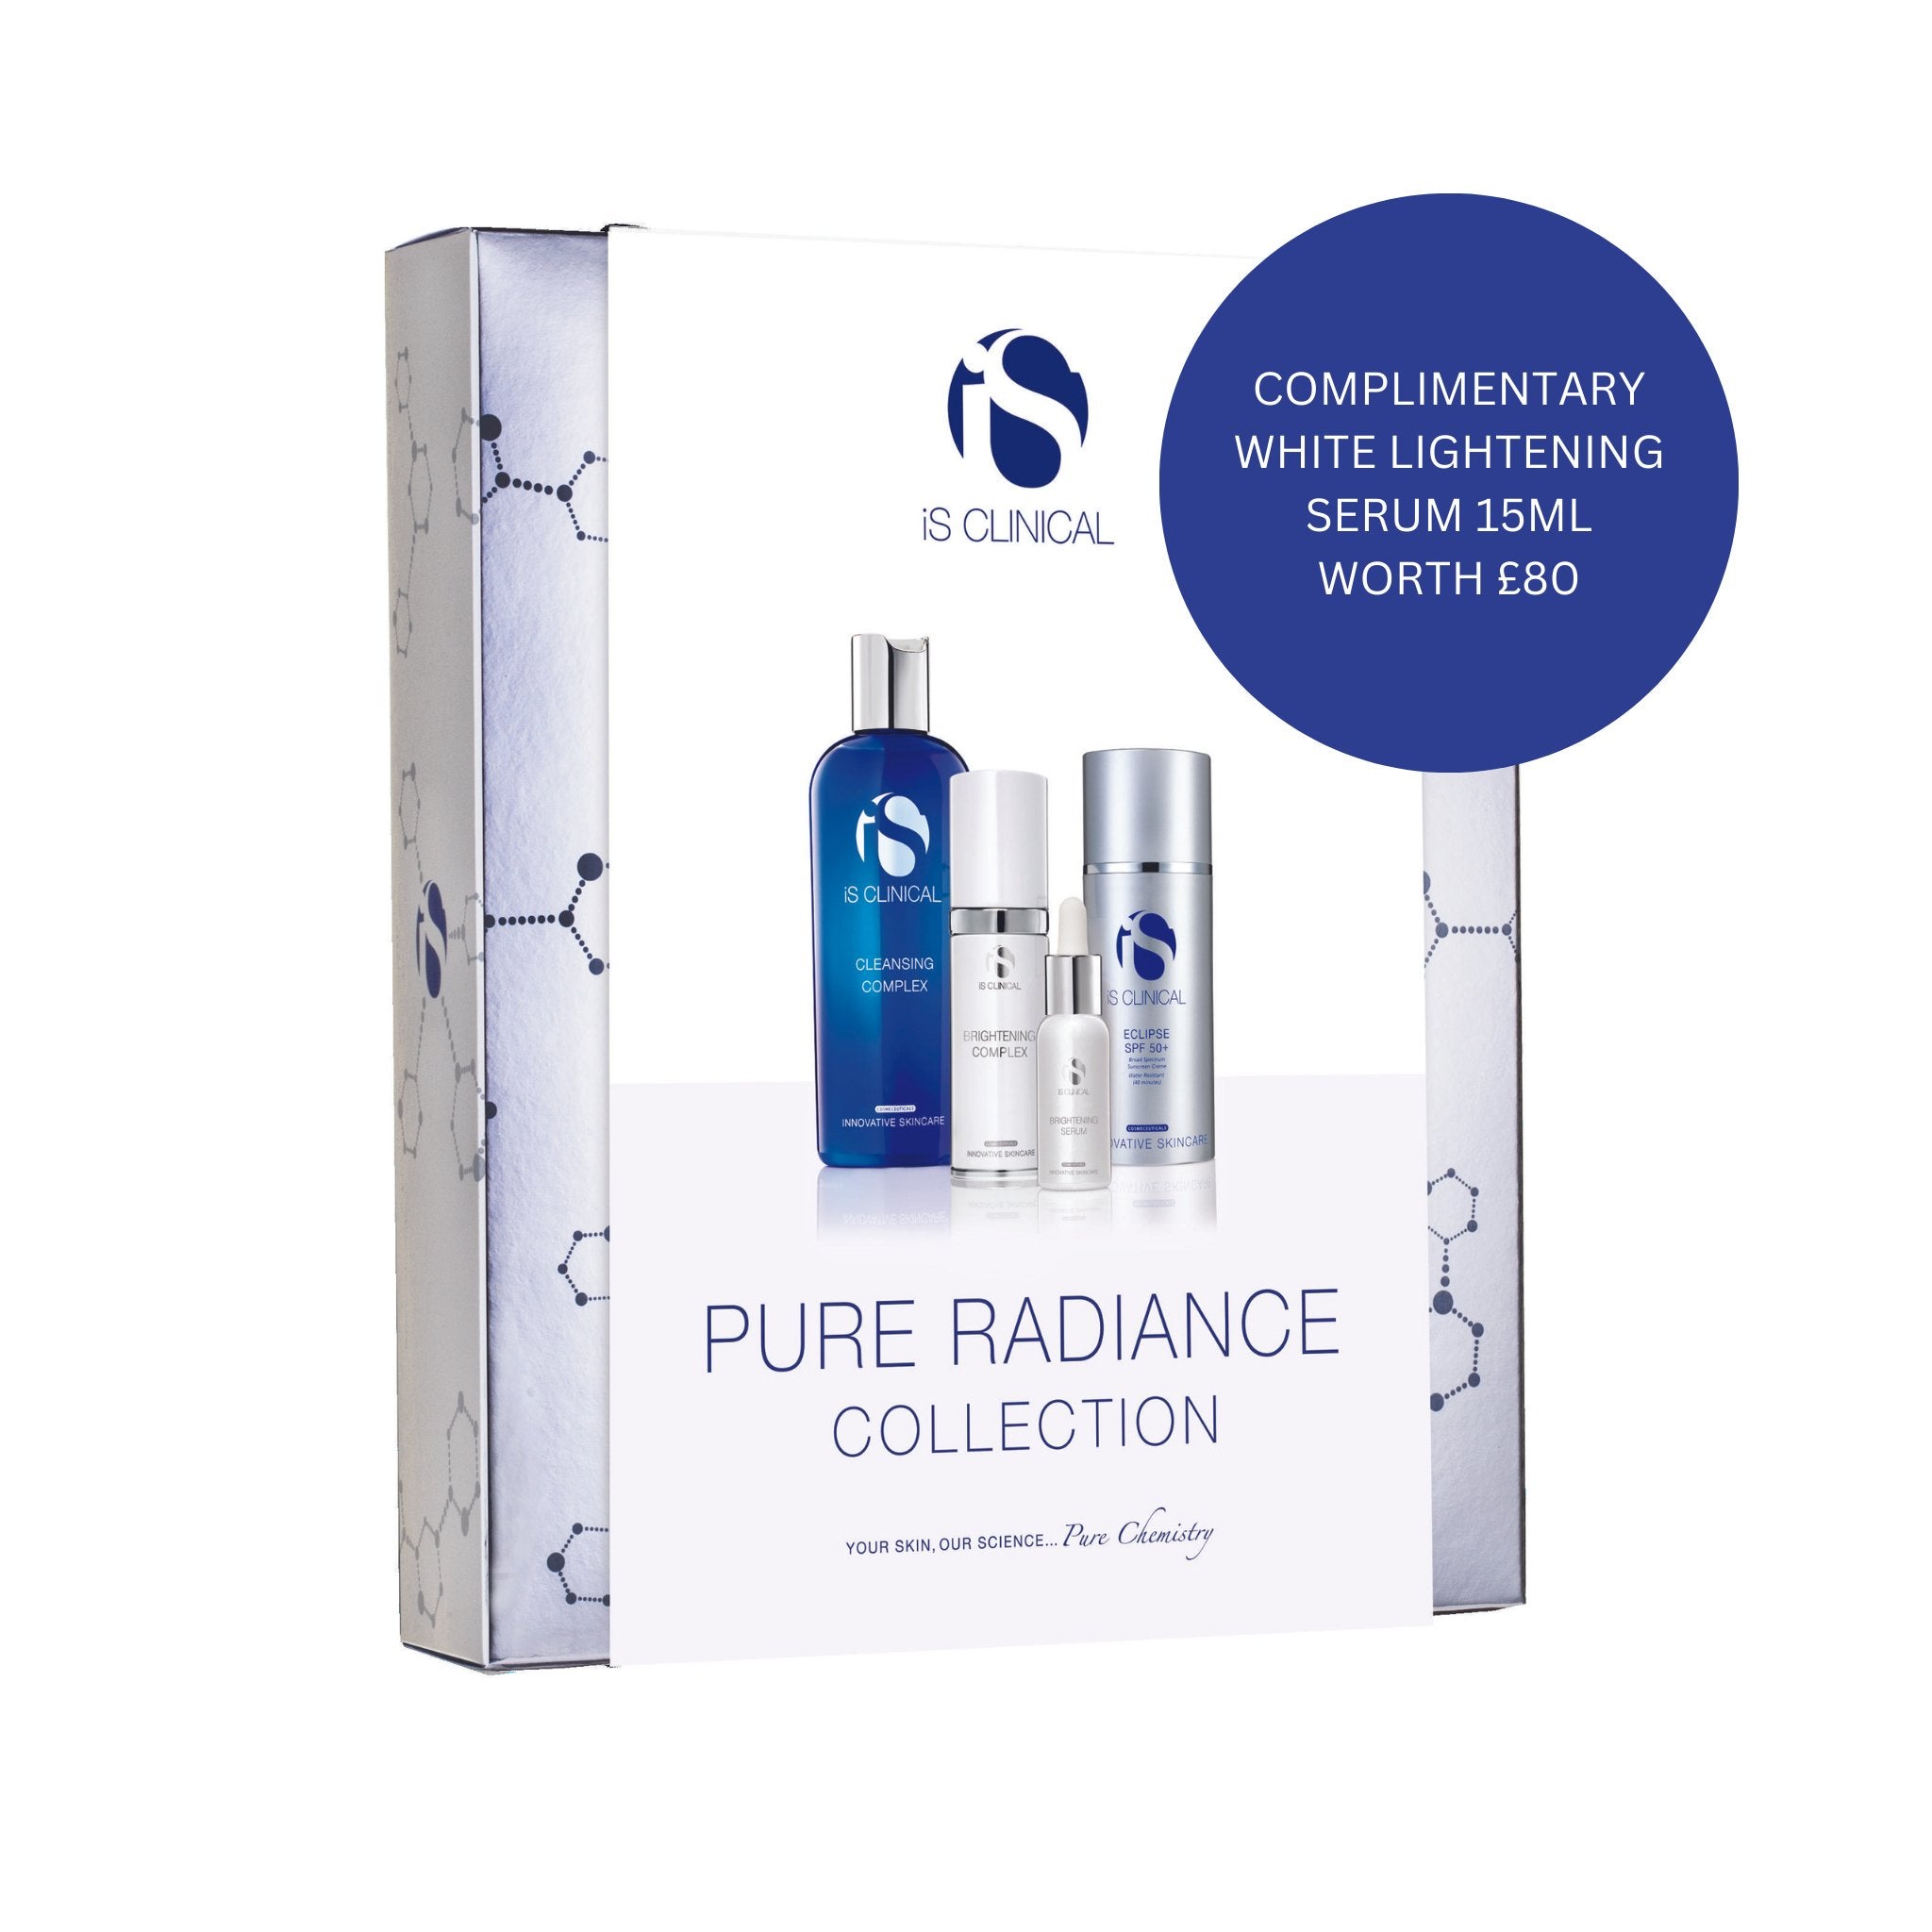 Pure Radiance Collection - Dr. Pen Store - iS Clinical Buy Genuine Dr Pen Products with Trust